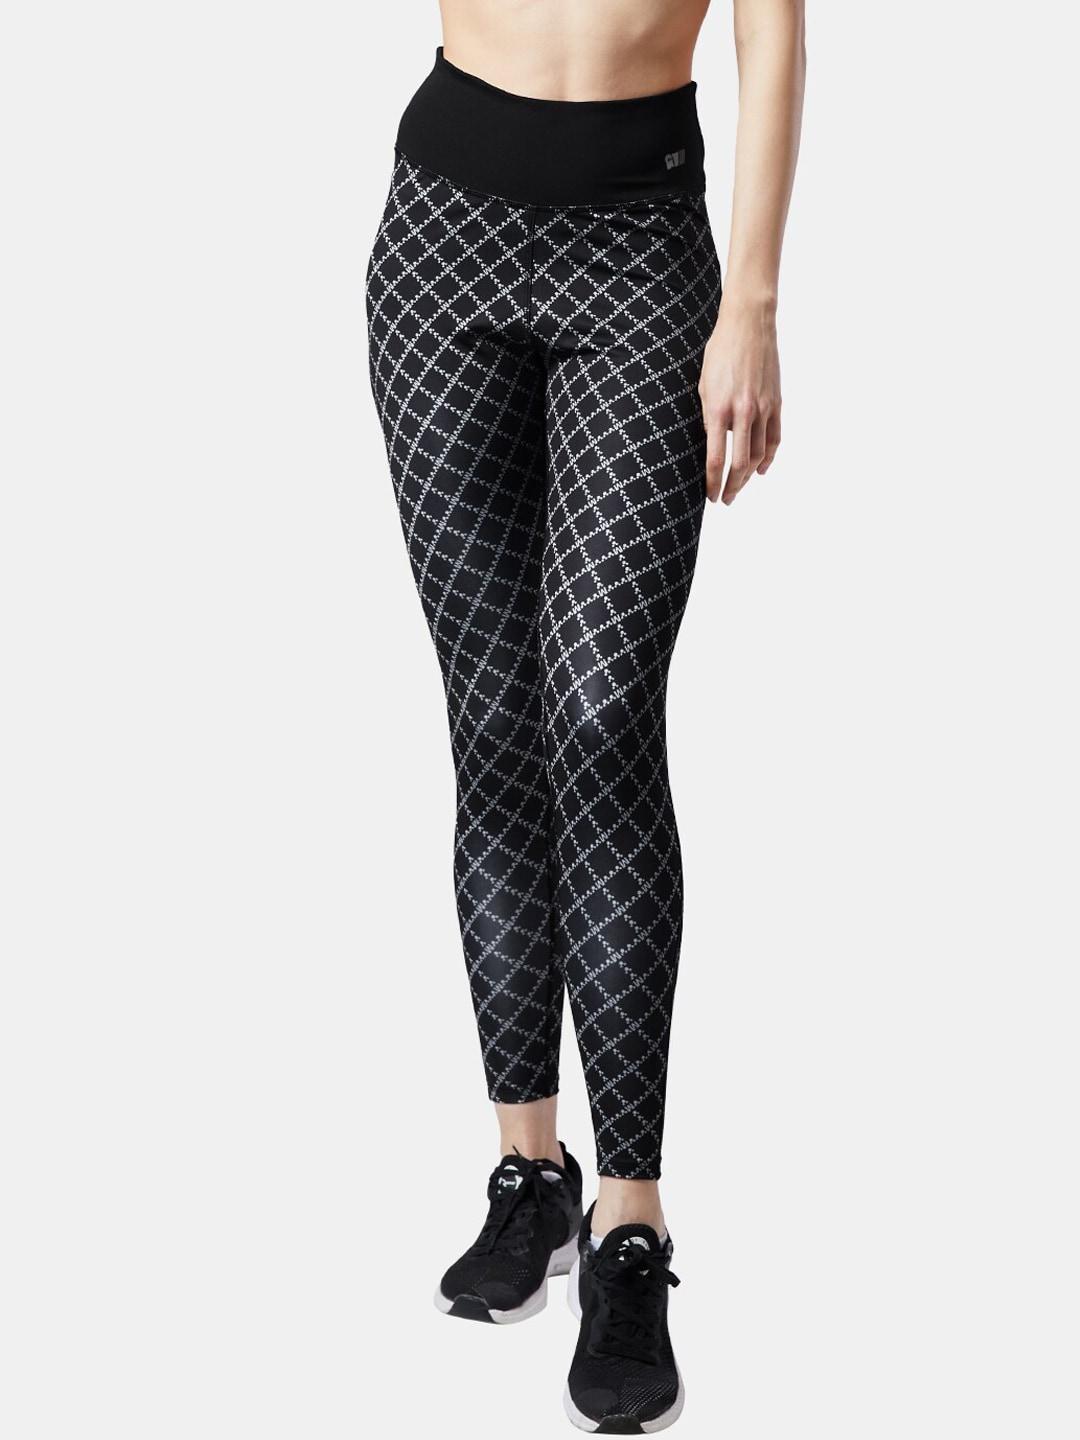 the souled store women black printed tights